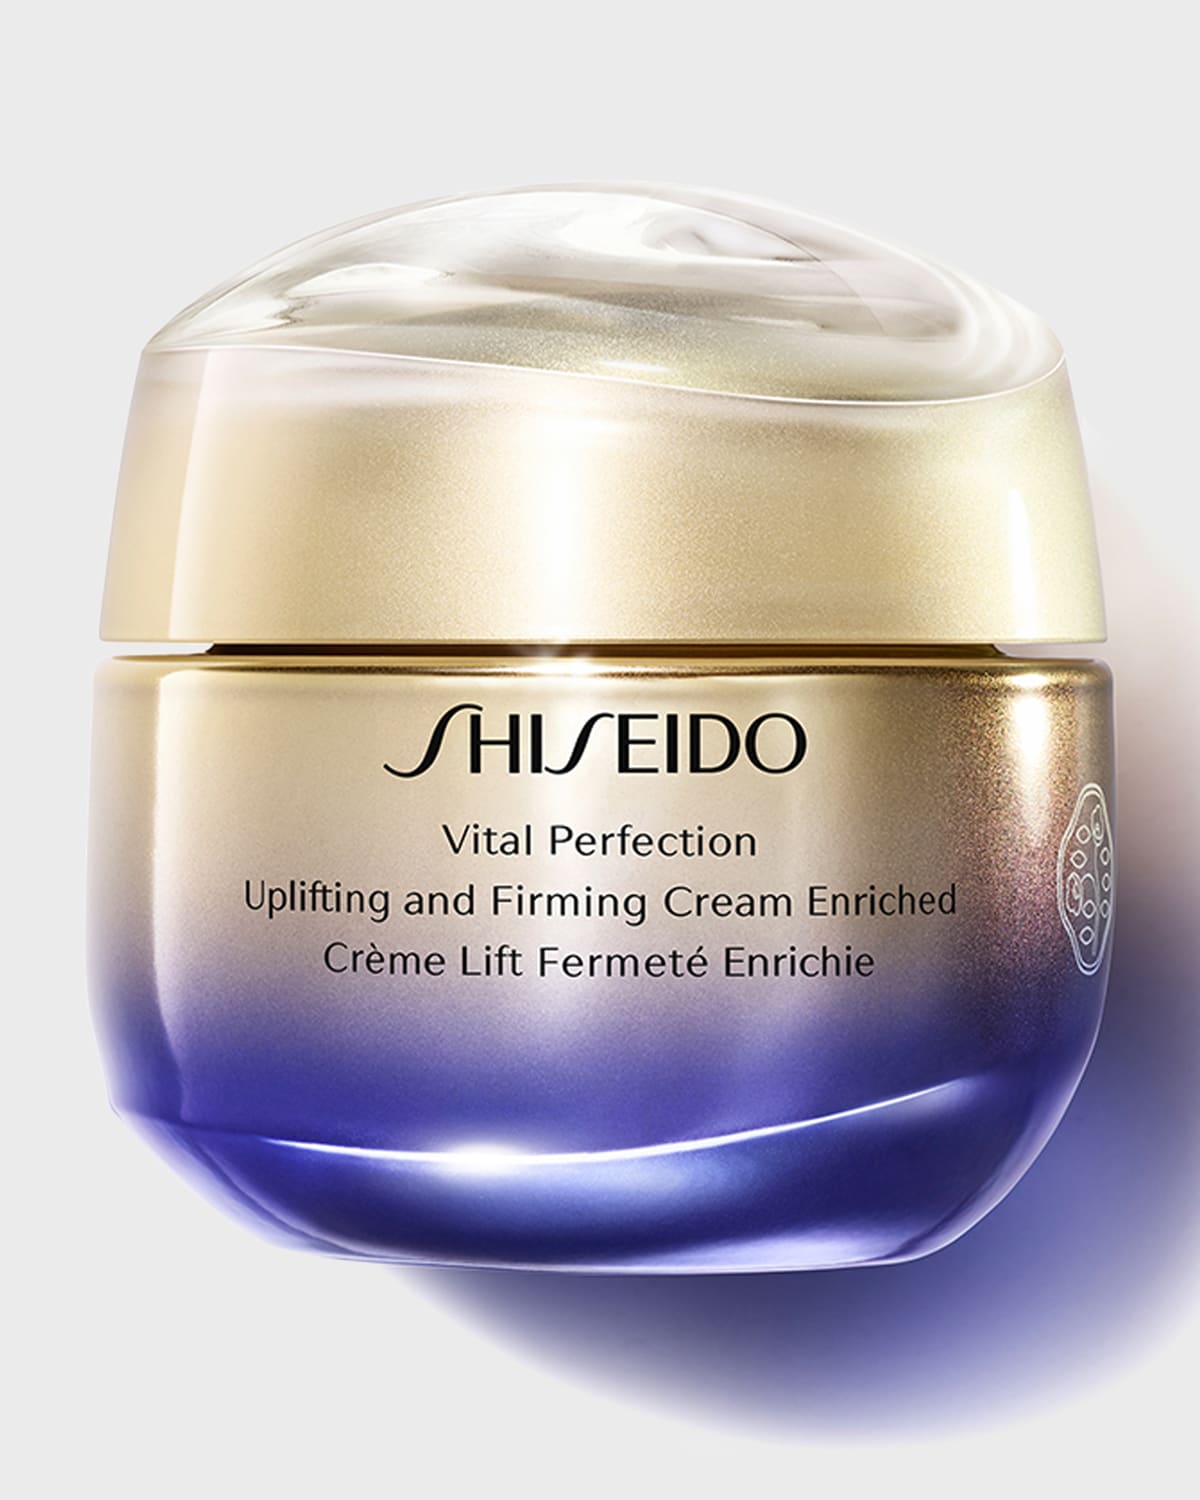 Vital Perfection Uplifting and Firming Cream Enriched, 1.7 oz.